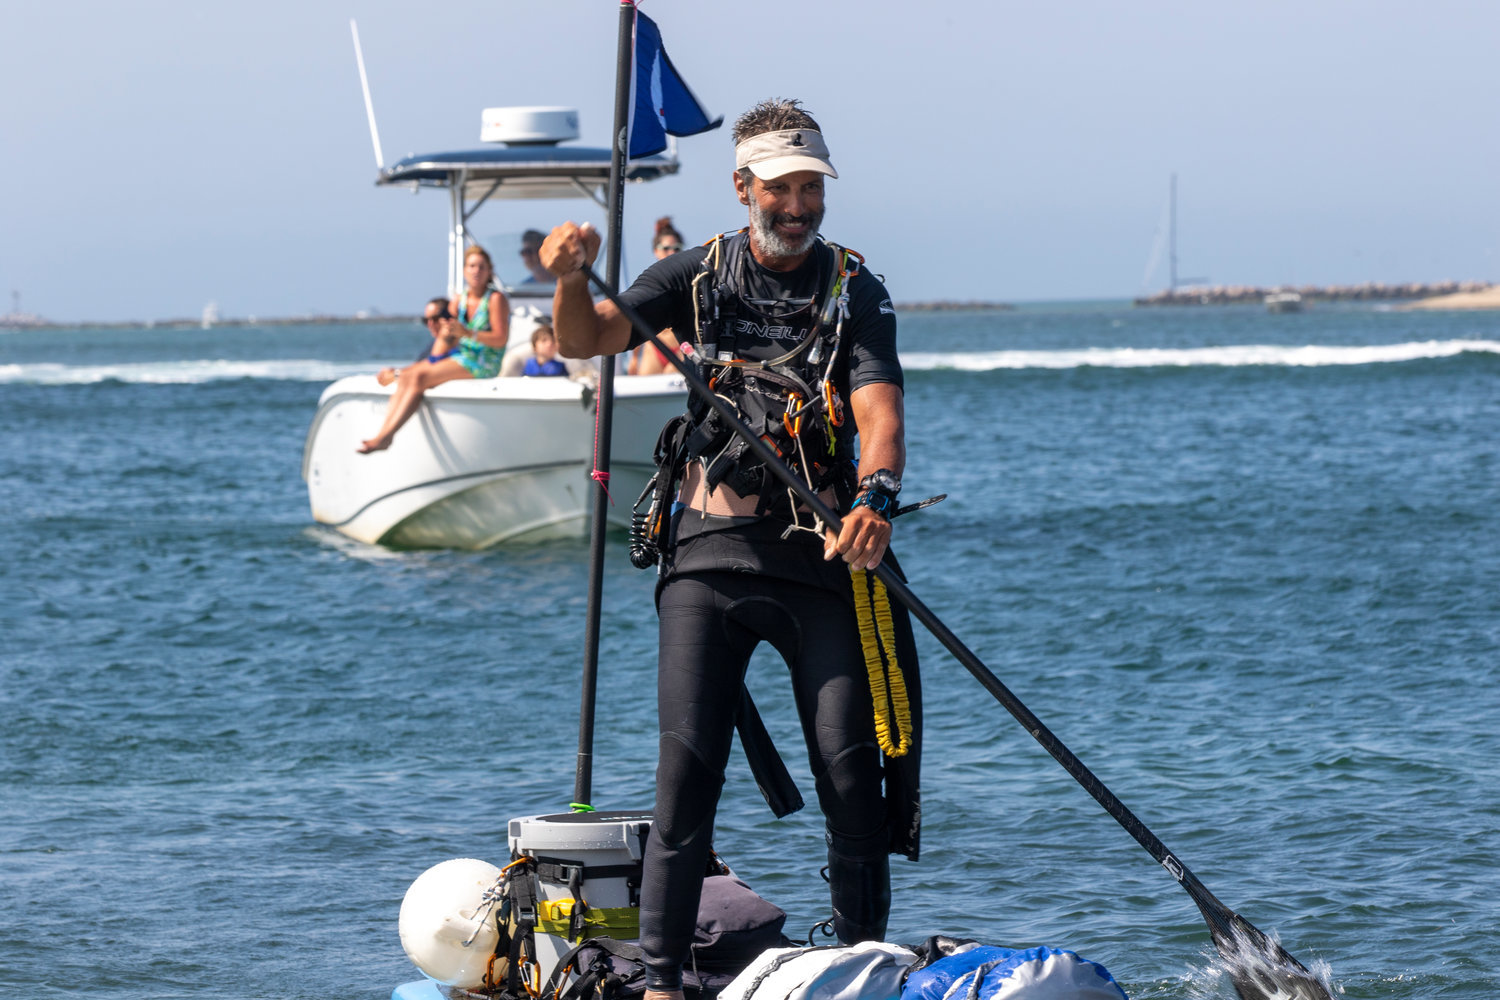 Adam Nagler completed his second long-distance paddleboard journey to Nantucket this summer.